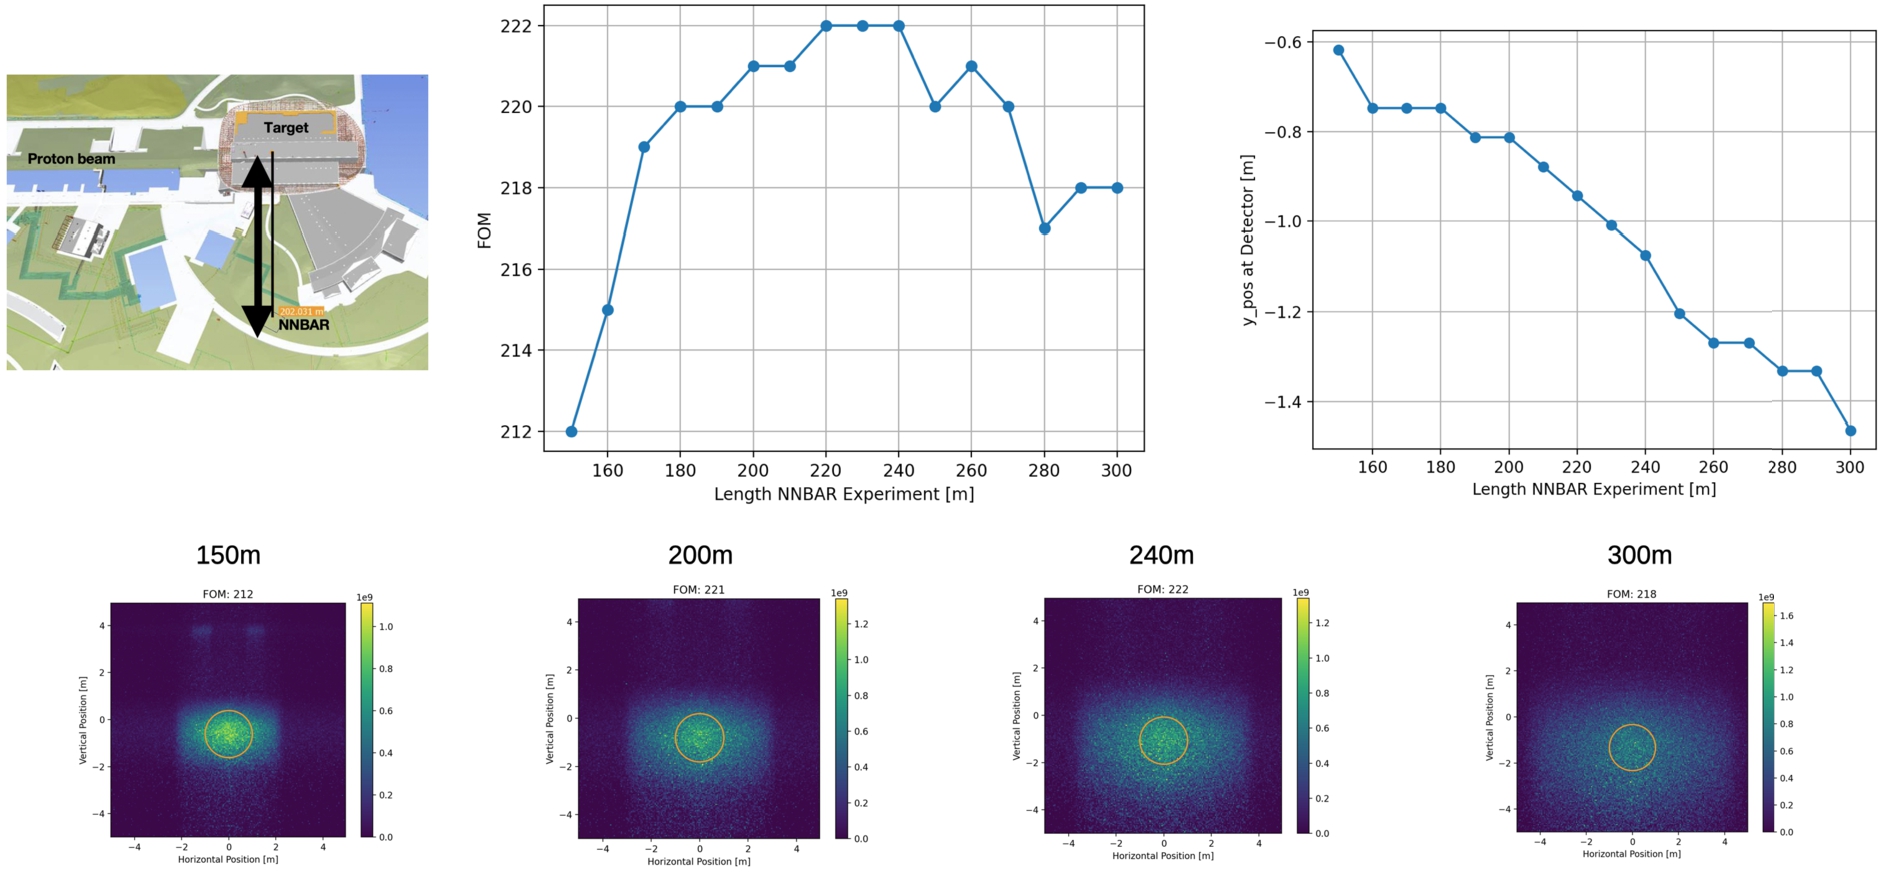 Results of simulations for a reflector placed at 11 m. The plot on the right shows the shift of the center of intensity on the detector due to gravity for longer baselines. At the bottom, images for selected lengths of the experiment are shown. The blurring is due to the increasing magnification.